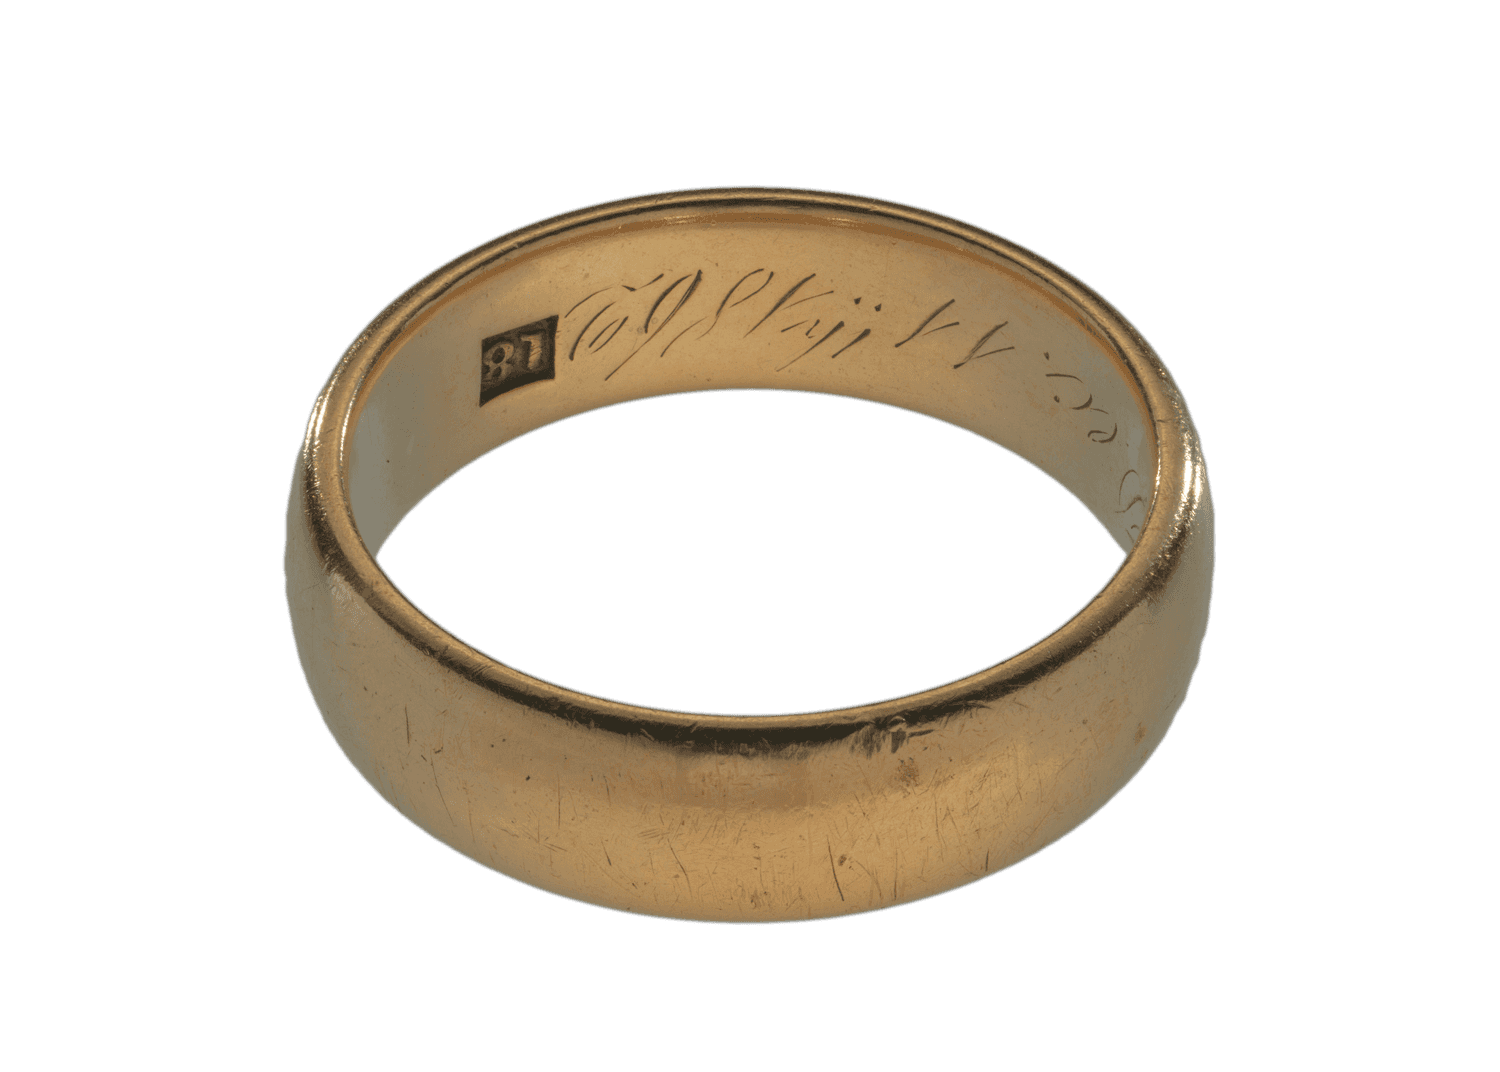 A simple gold ring with some writing inside. The ring is slightly worn and scratched.